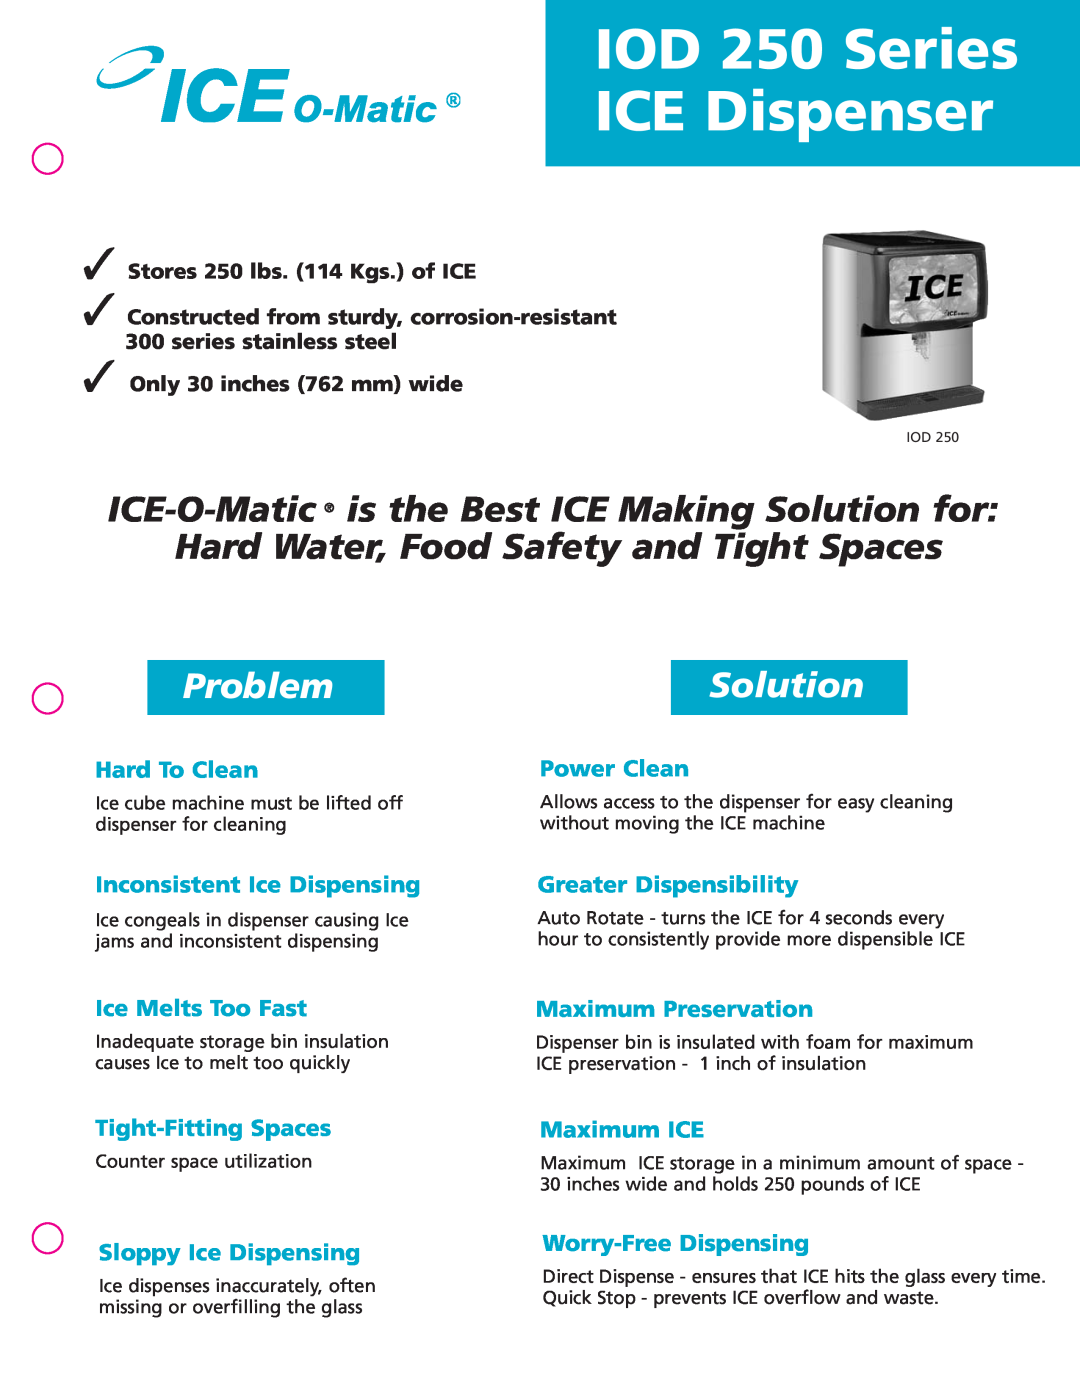 Ice-O-Matic manual IOD 250 Series, ICE Dispenser, Problem, Solution 